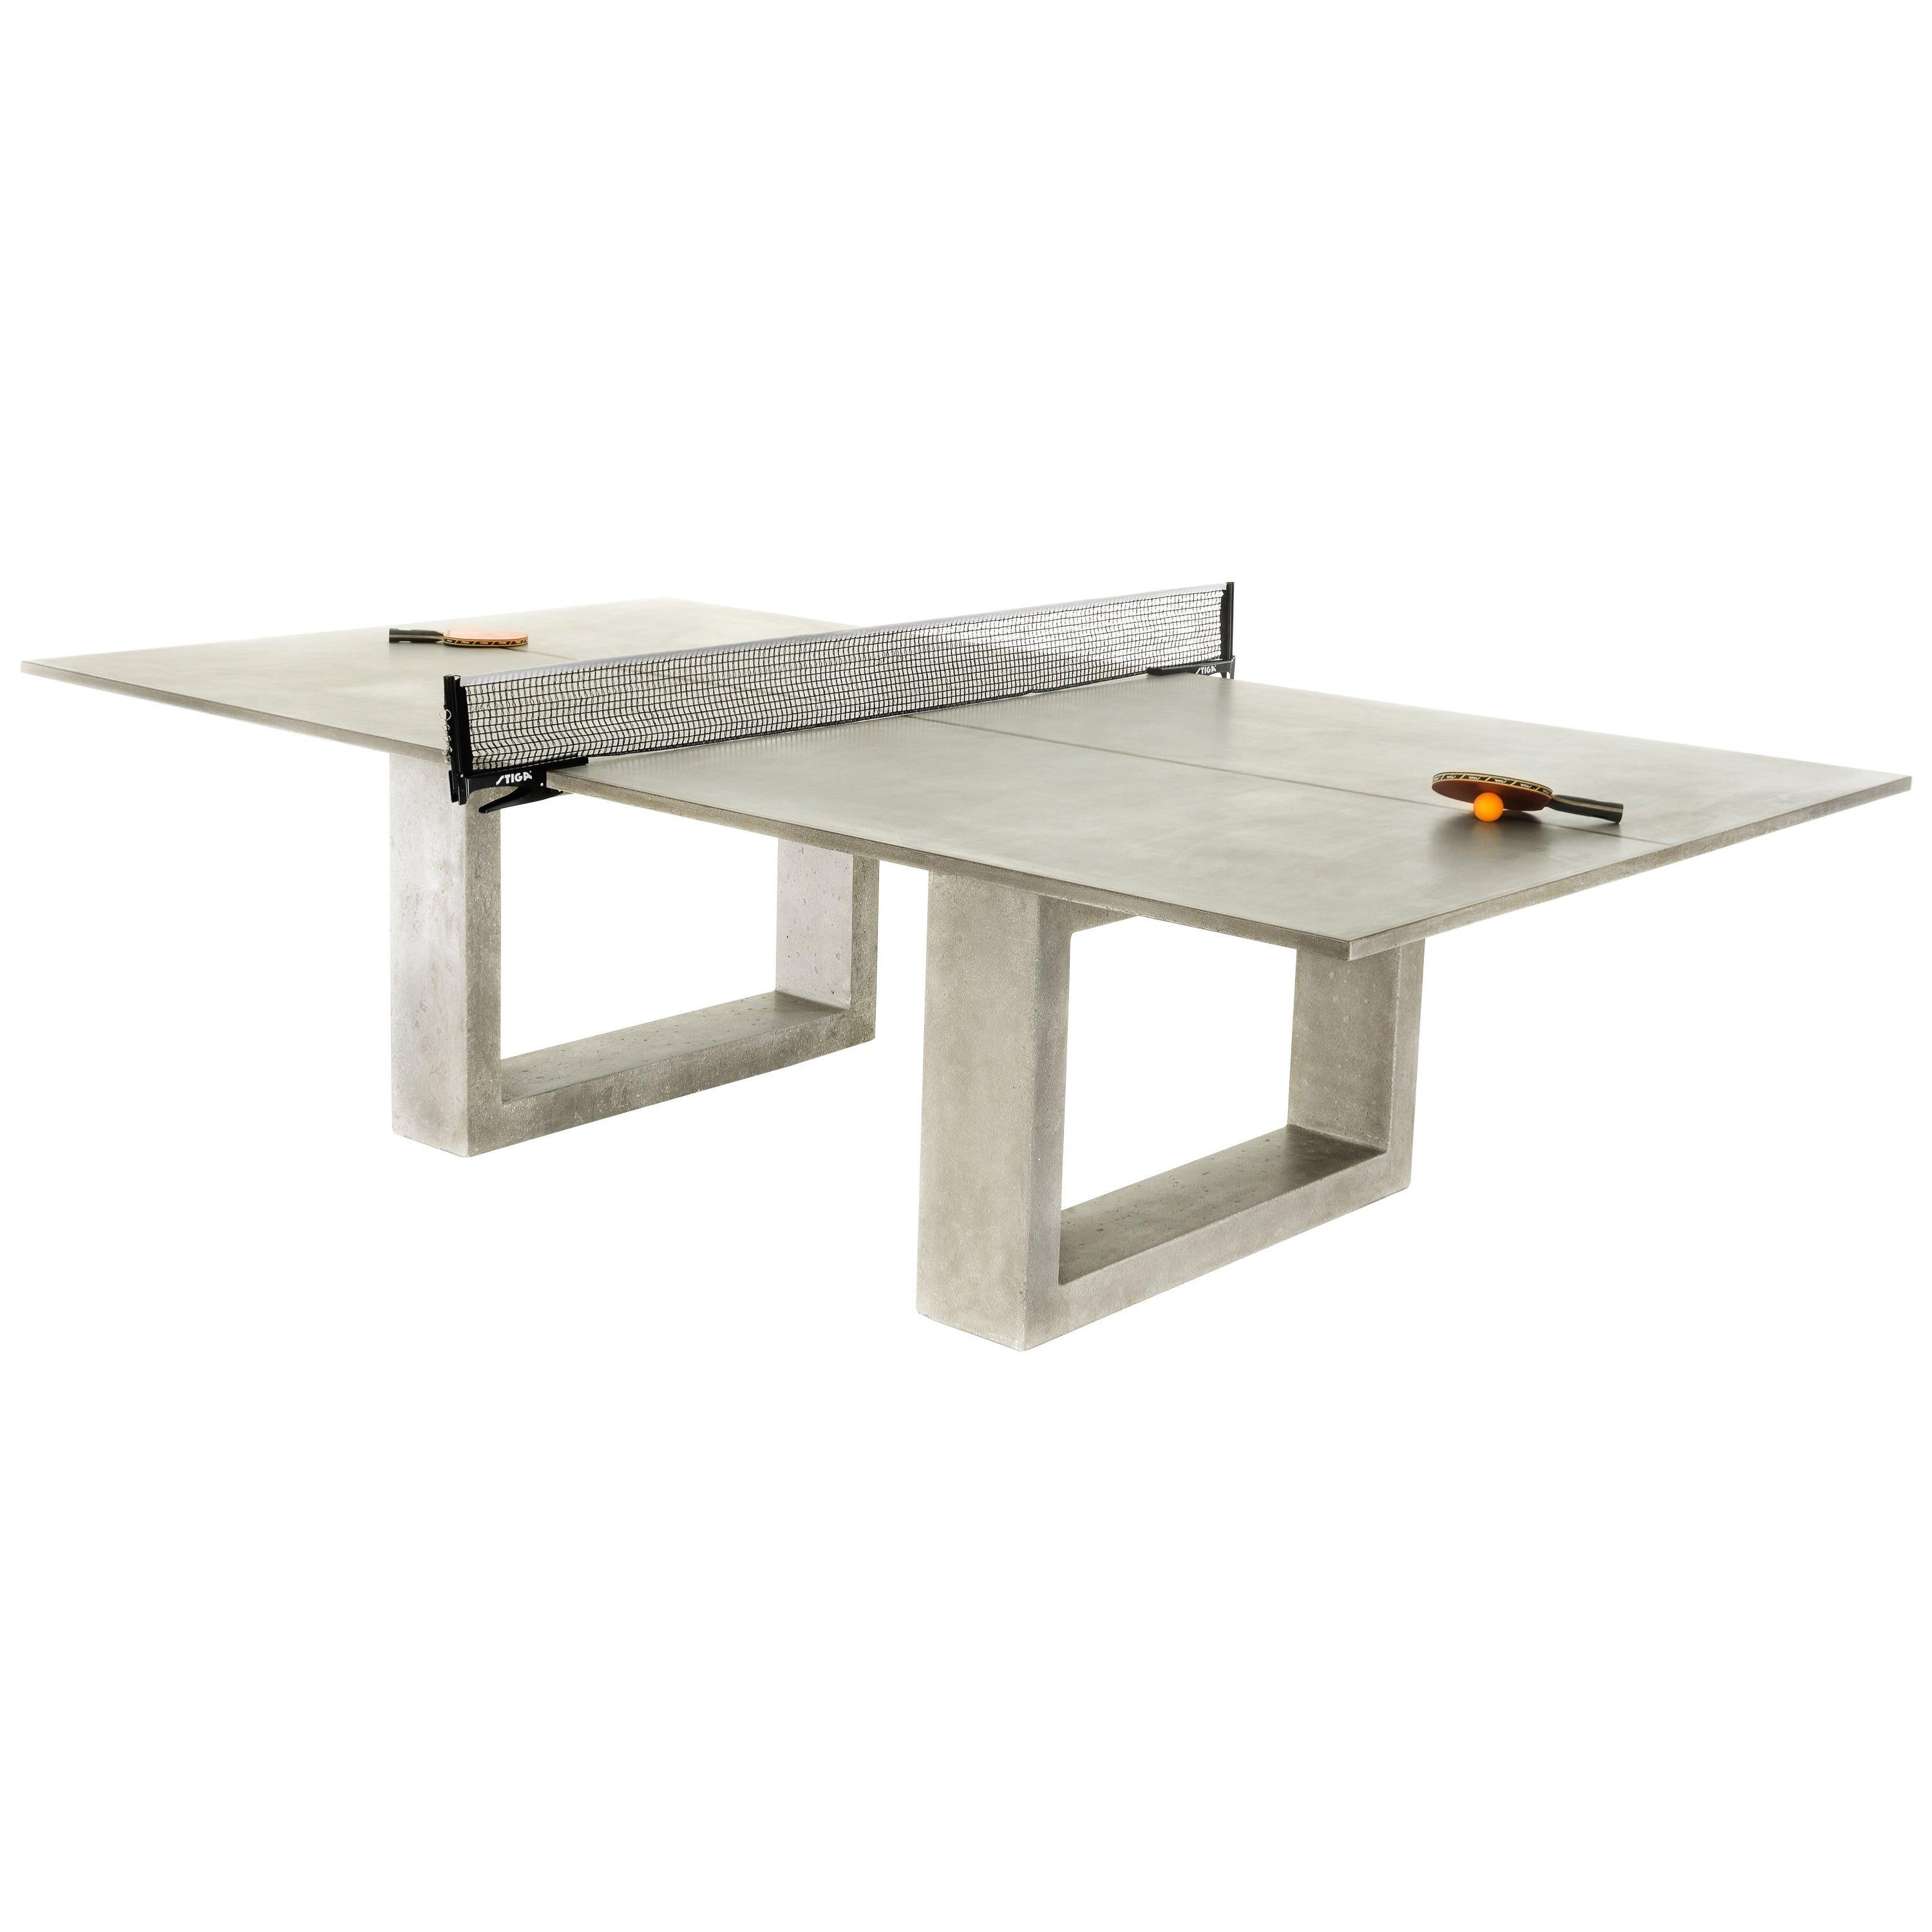 James de Wulf Commercial Concrete Ping Pong Table For Sale